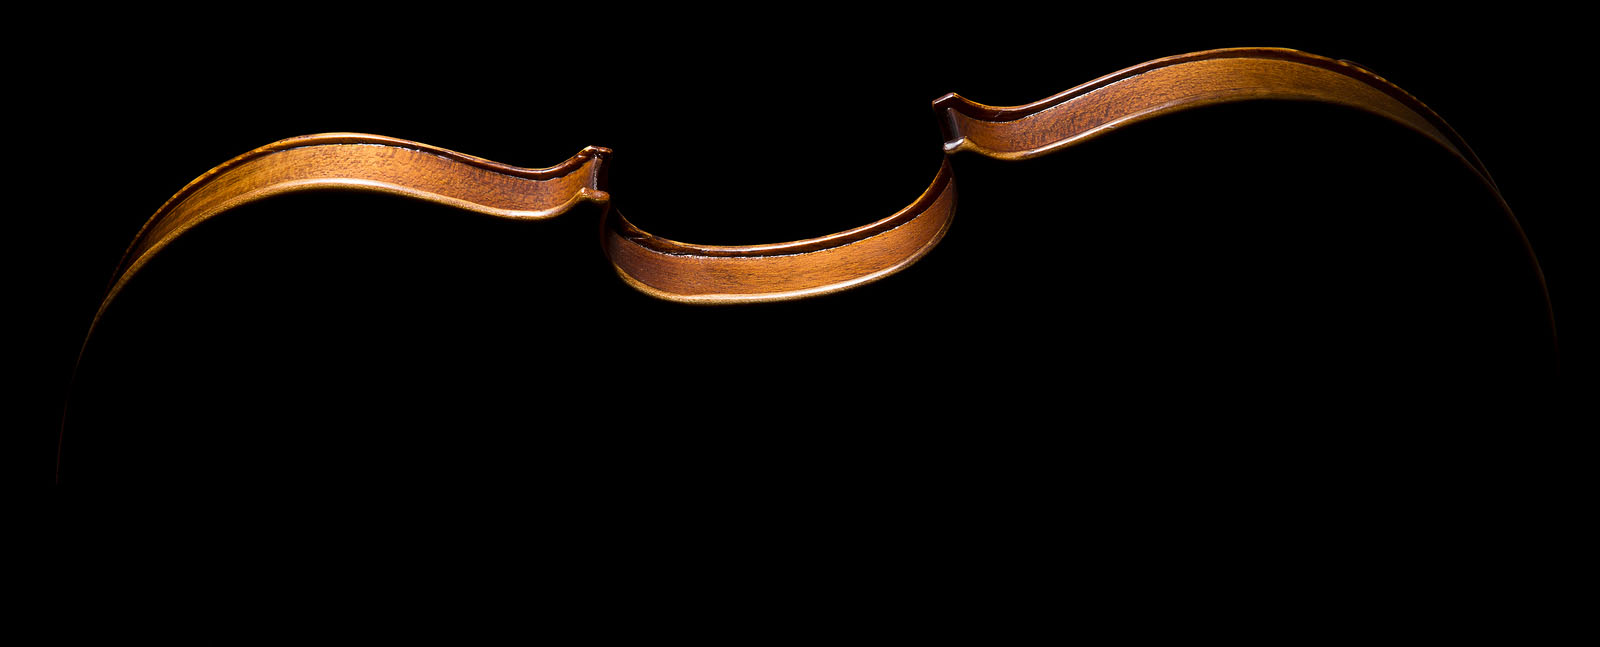 footer image of violin on its side